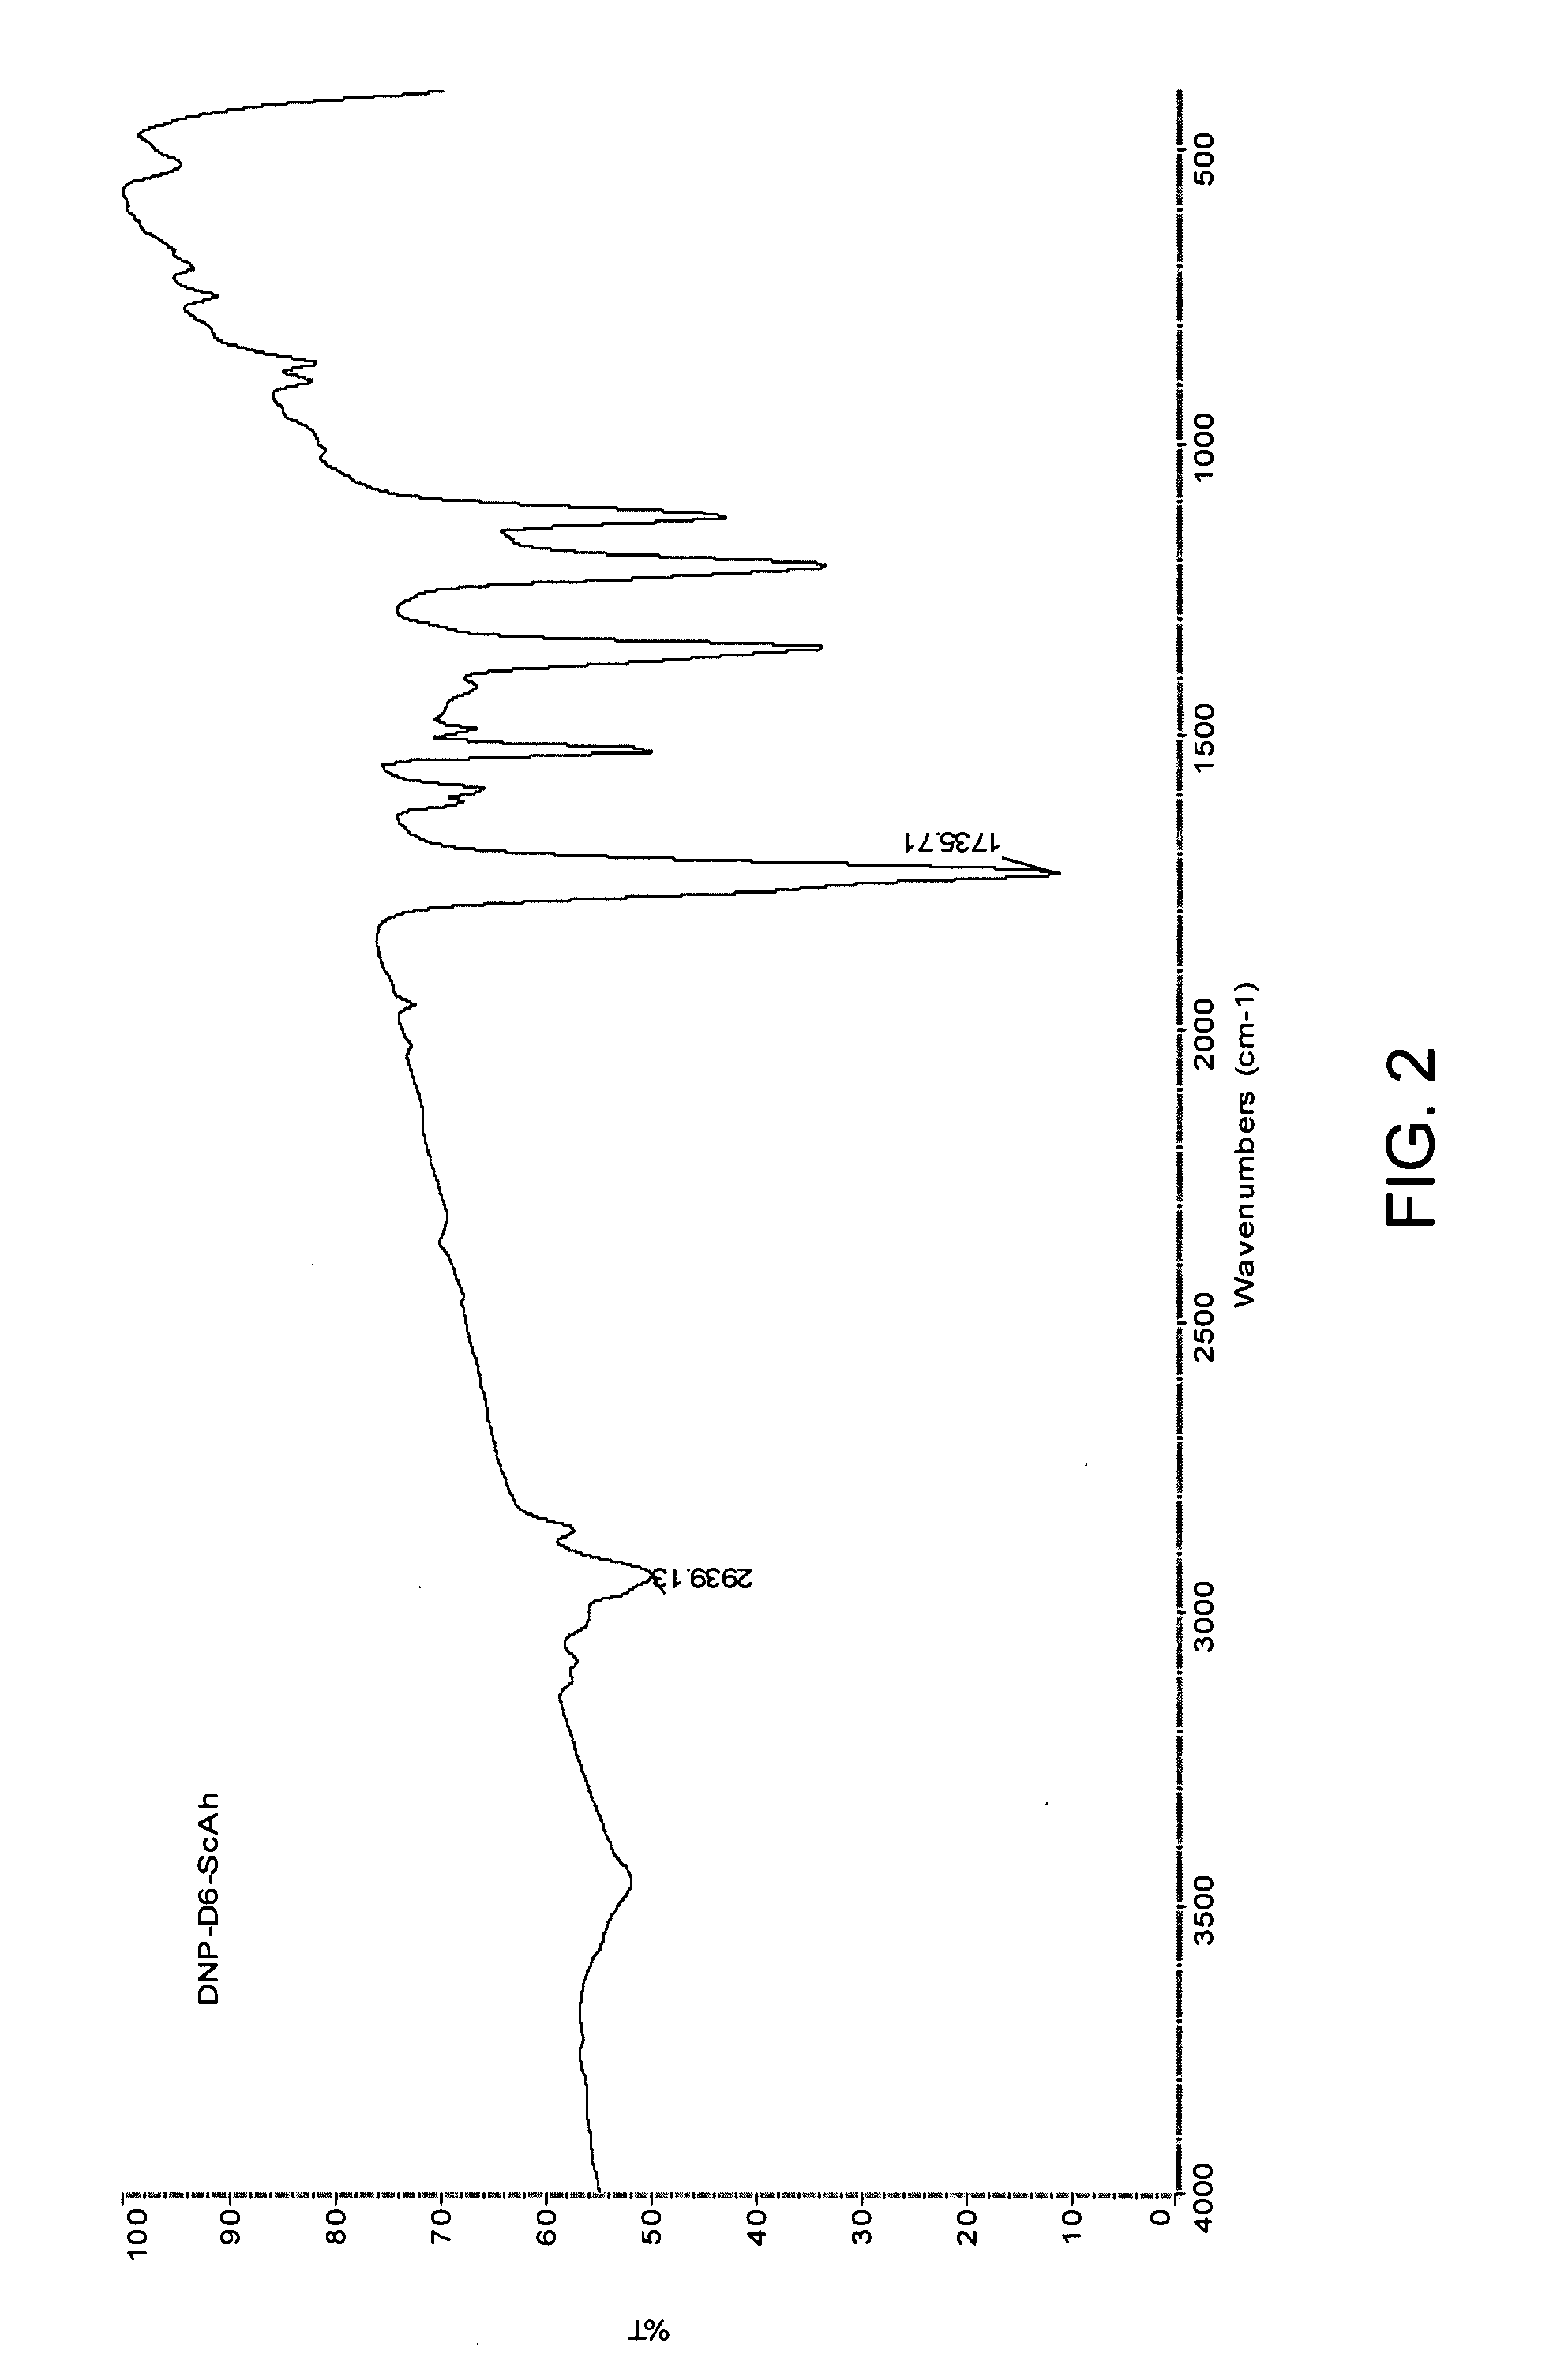 Alkylene-dicarboxylate-containing biodegradable poly(ester-amides) and methods of use